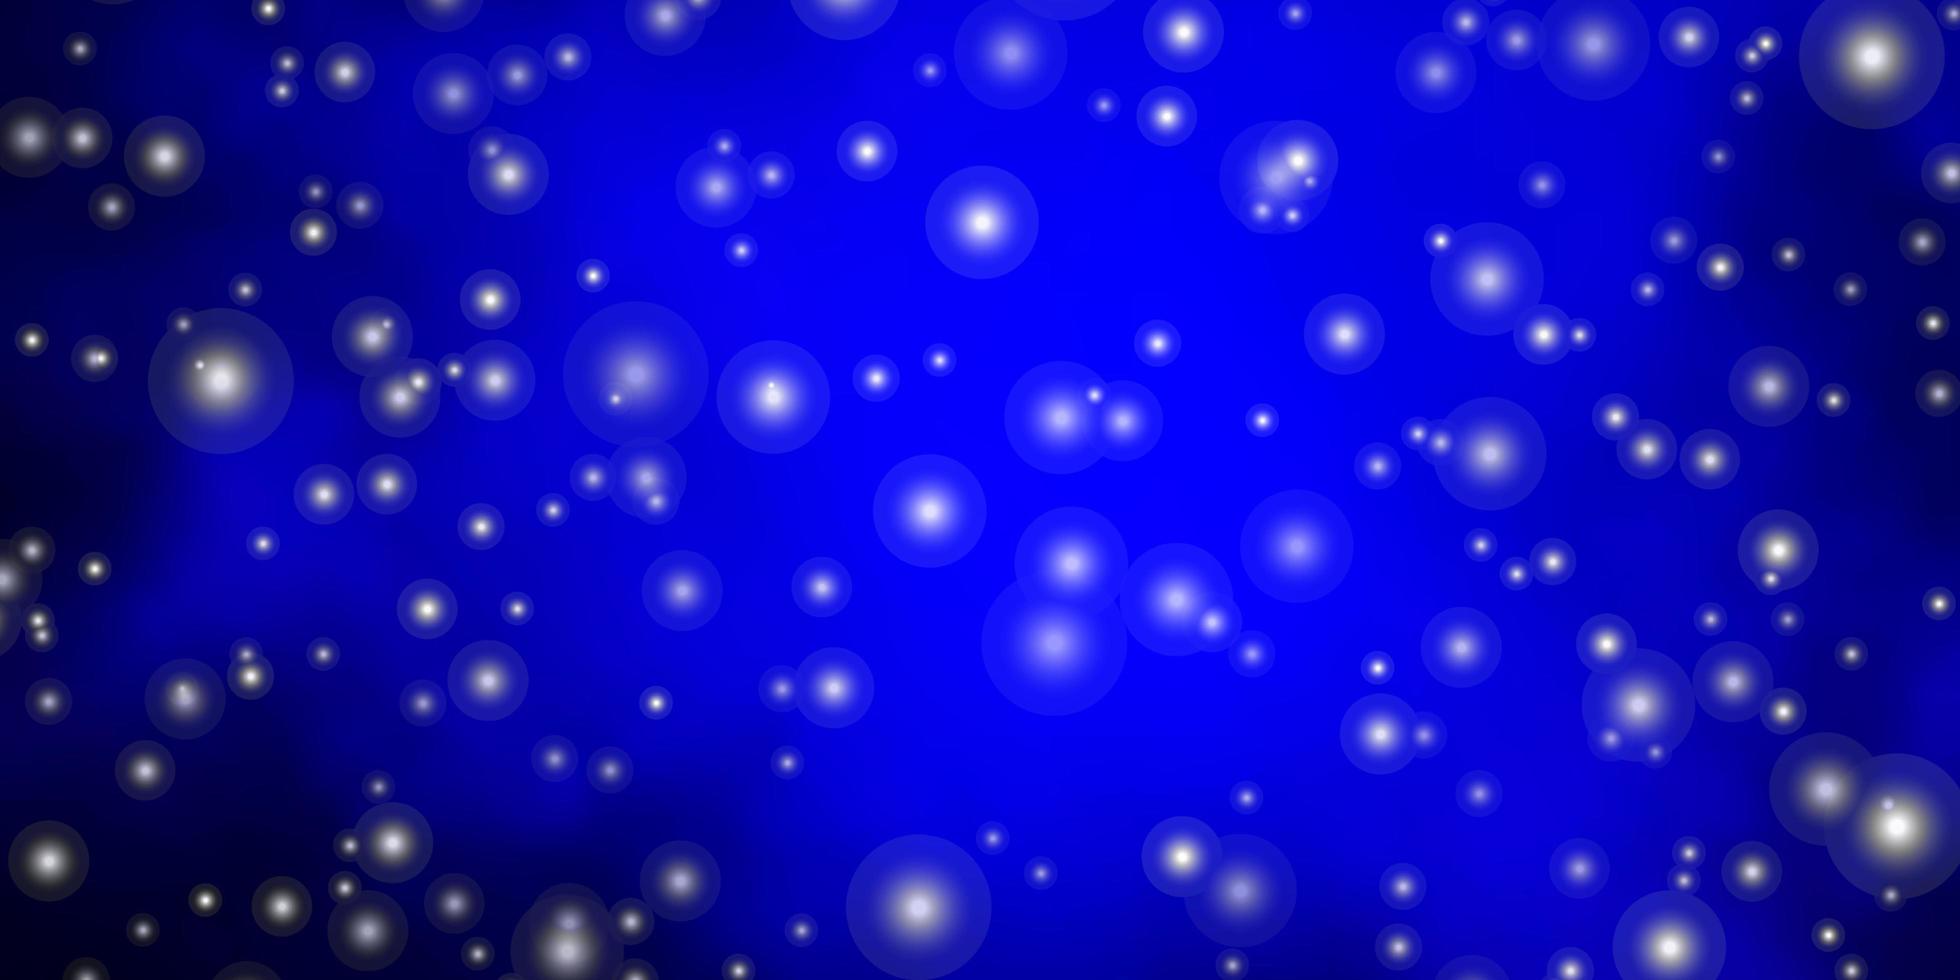 Dark BLUE vector background with small and big stars. Decorative illustration with stars on abstract template. Pattern for wrapping gifts.